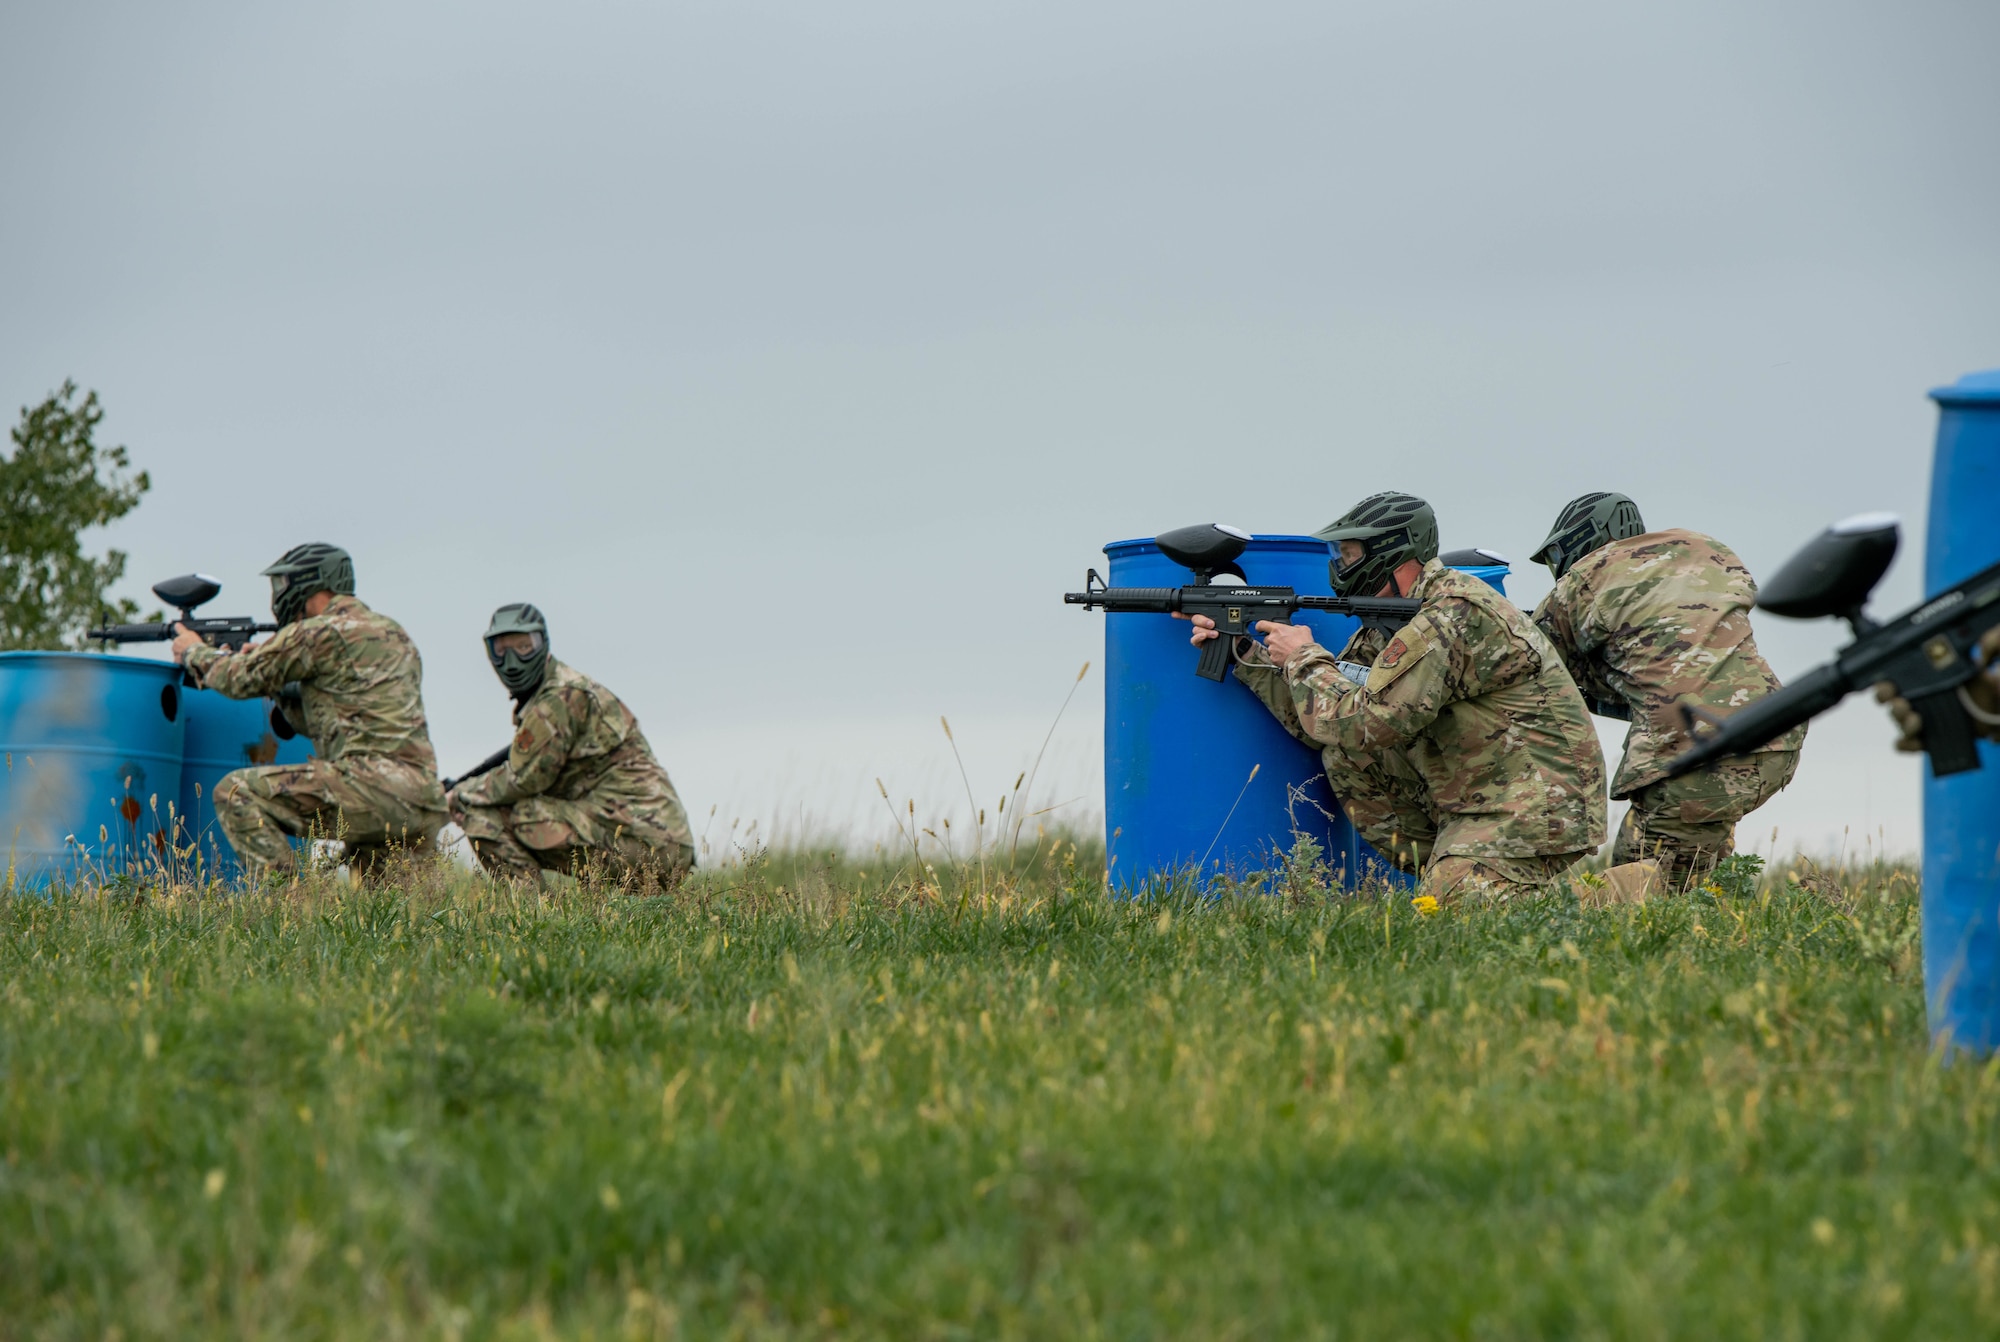 Airmen assigned to the 114th Civil Engineer Squadron practice shoot, move, communicate drills during October's Unit Training Assembly as part of the Multi-Capable Airman (MCA) concept.